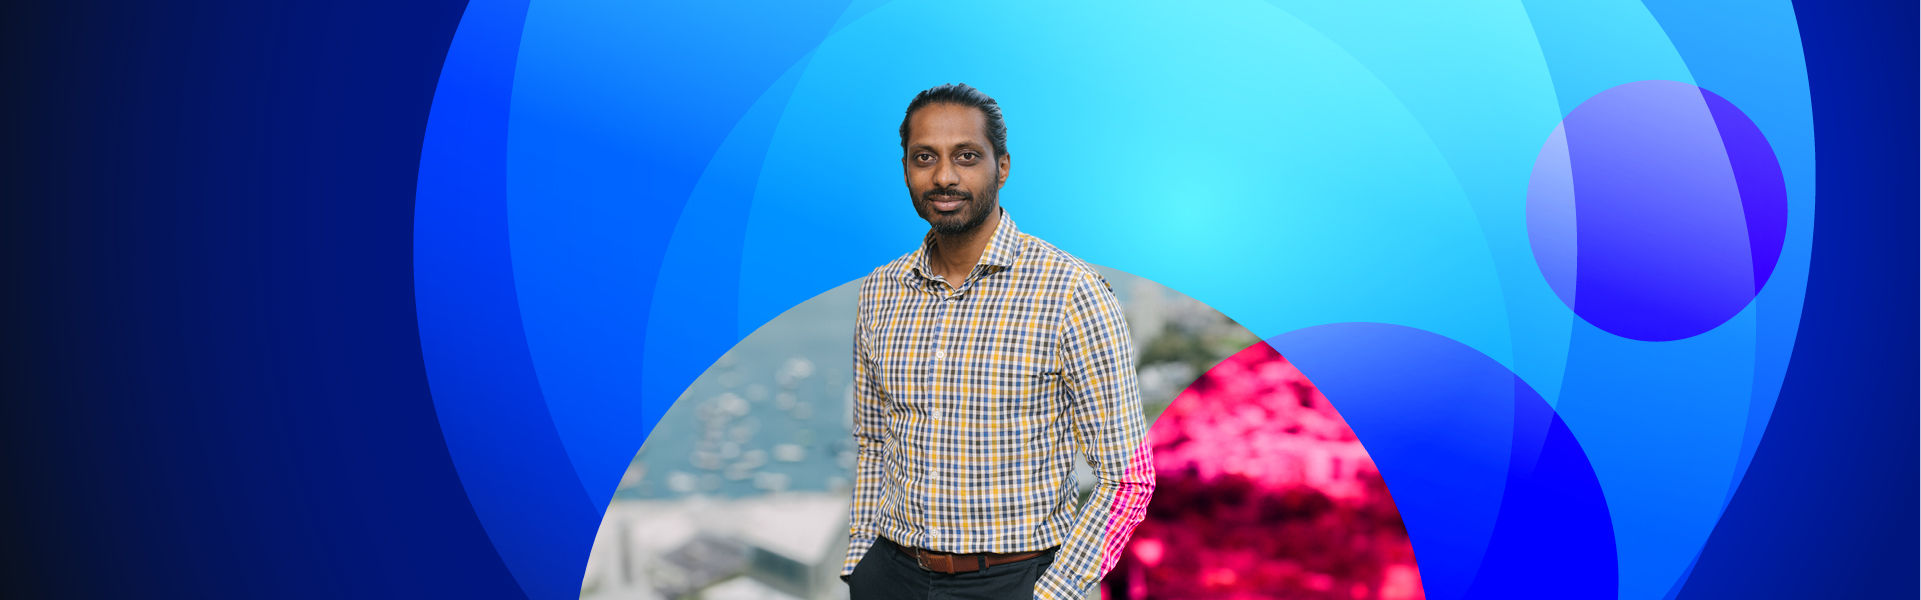 Image of Vickesh Kambaran standing in front of a background of circles in various shades of blue 